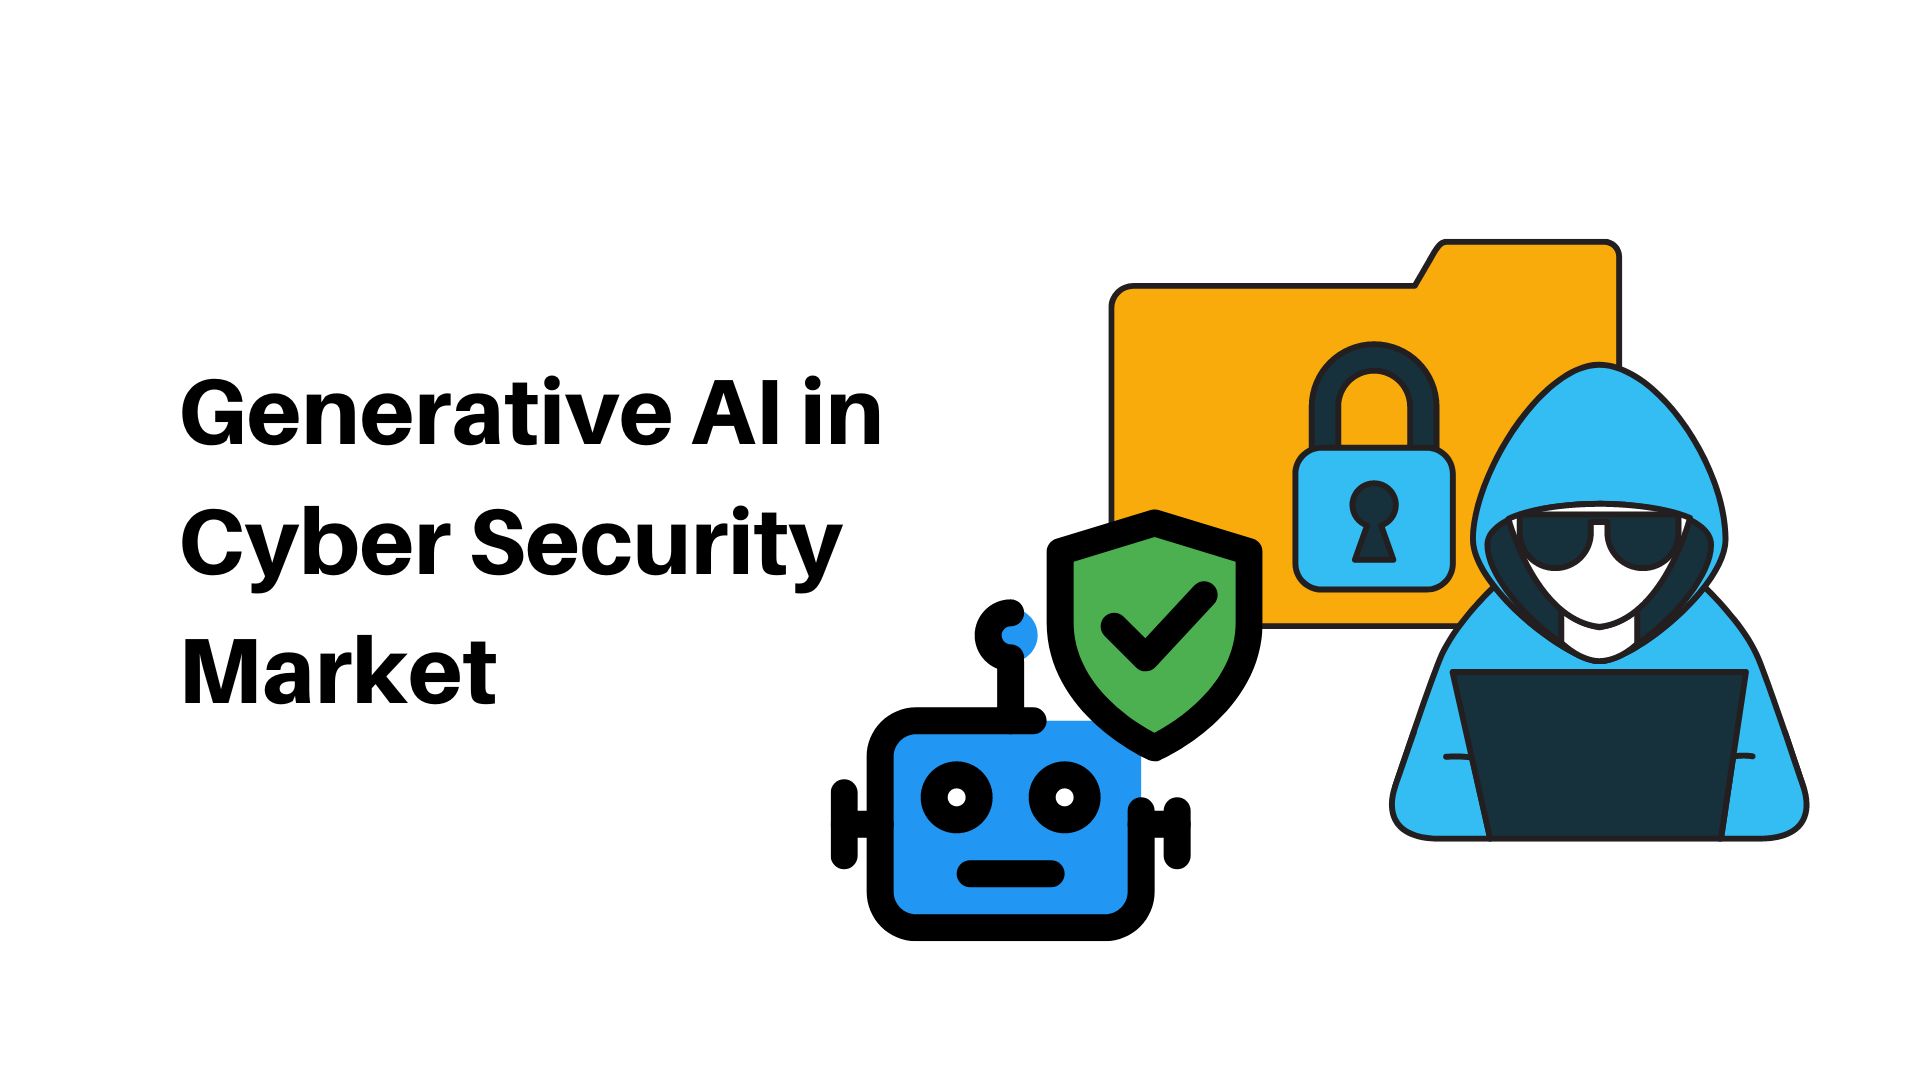 Generative AI in Cyber Security Market Growing at a CAGR of 22.1% Driven by Improvements in Product Design